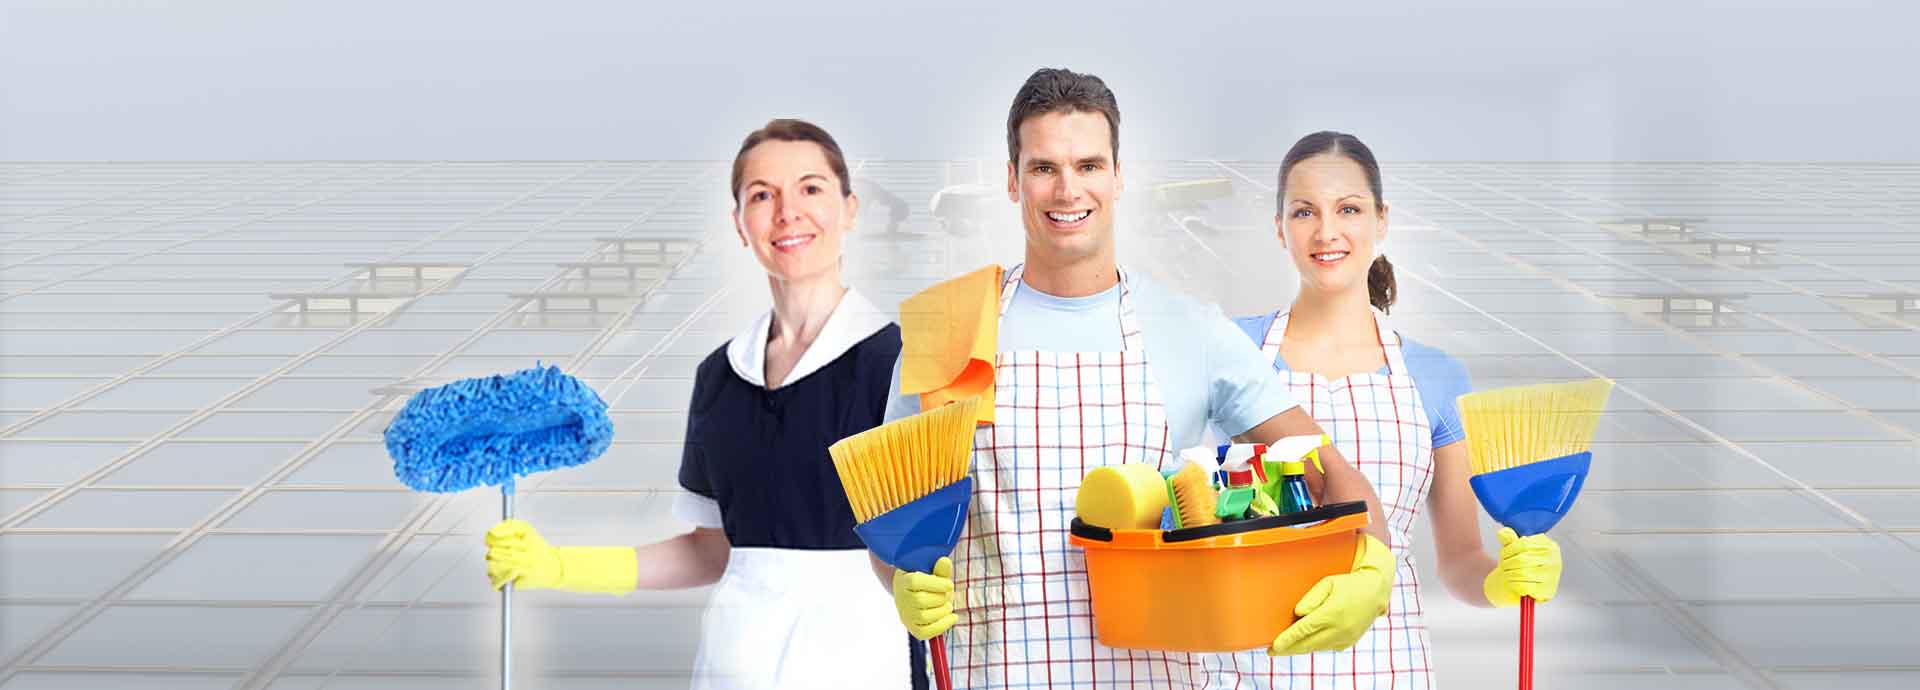 What is the important information needs to know about the End of Lease Cleaning Service?